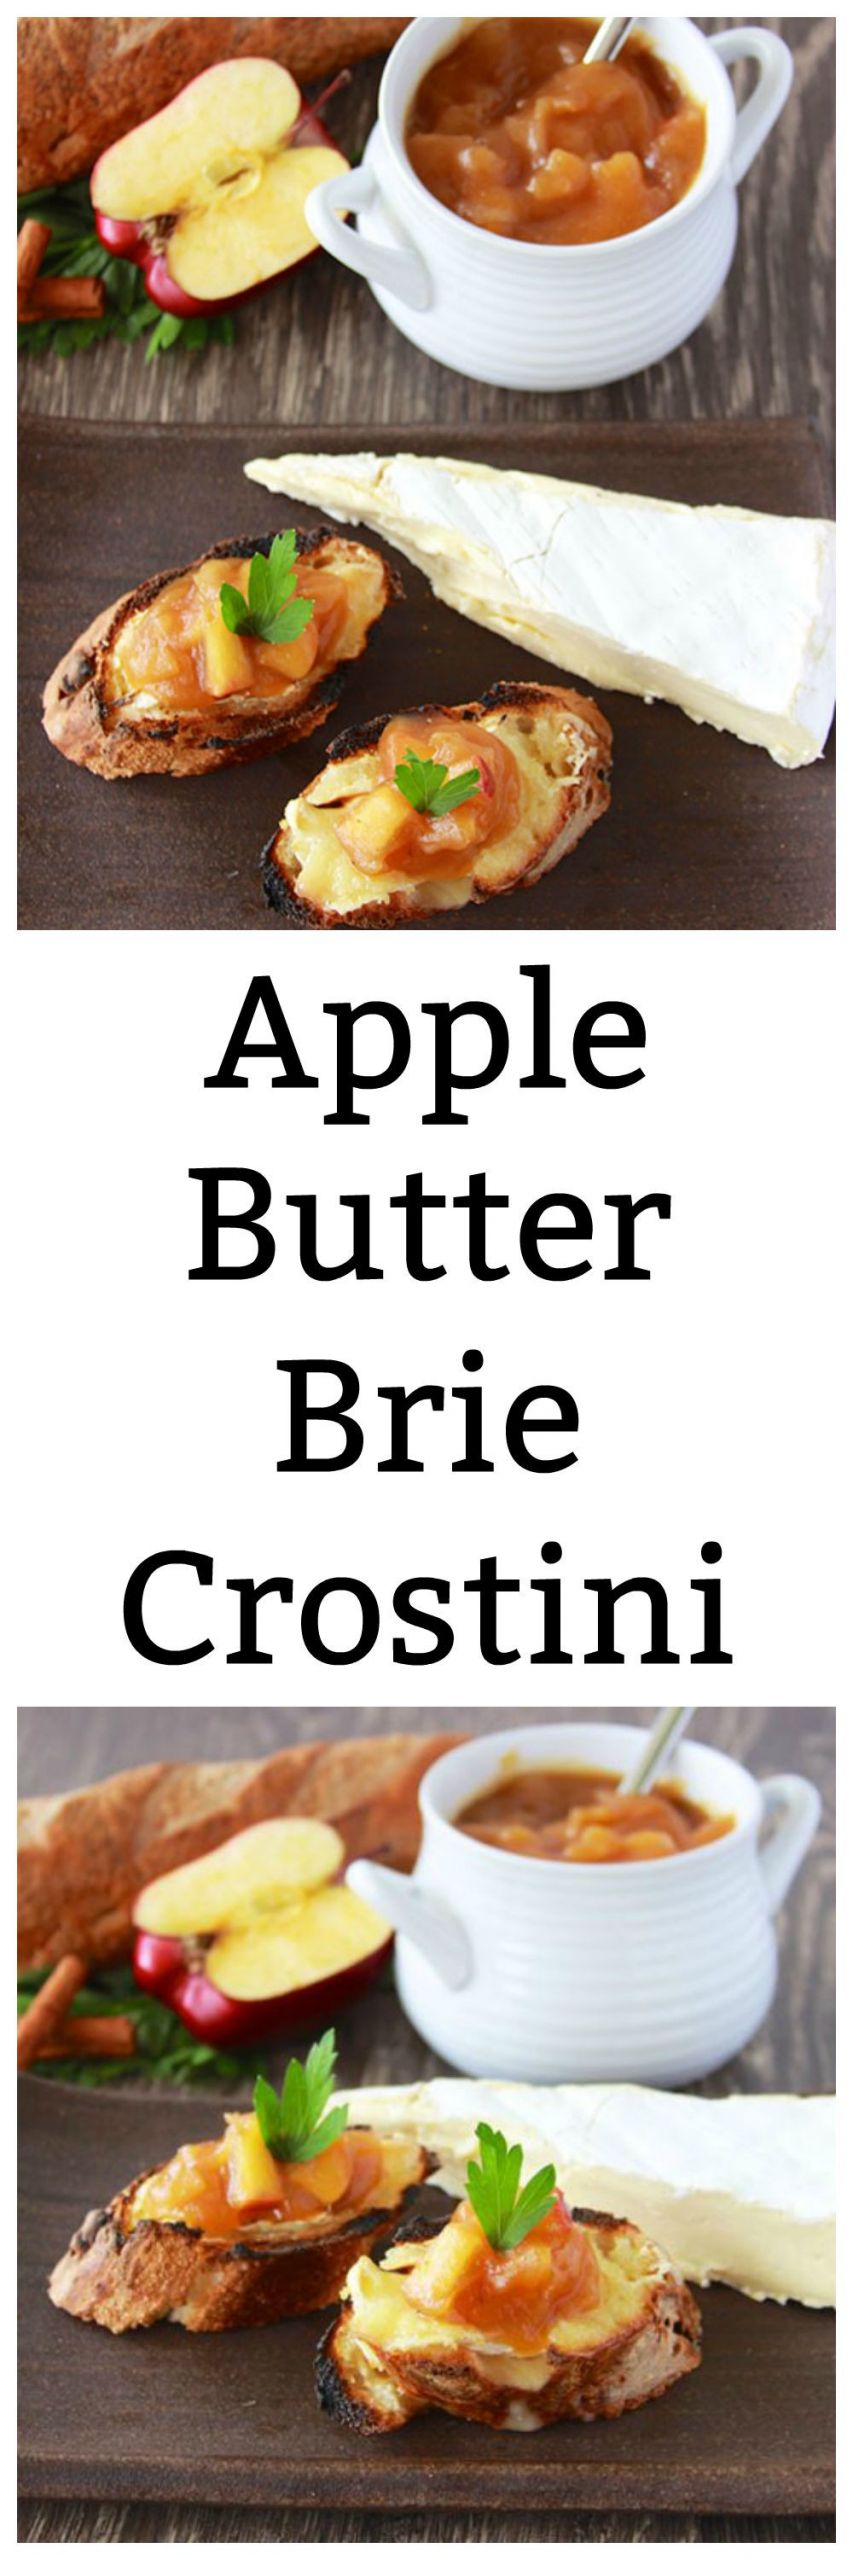 Apple Appetizer Recipes
 Apple Butter Brie Crostini Cooking With Ruthie